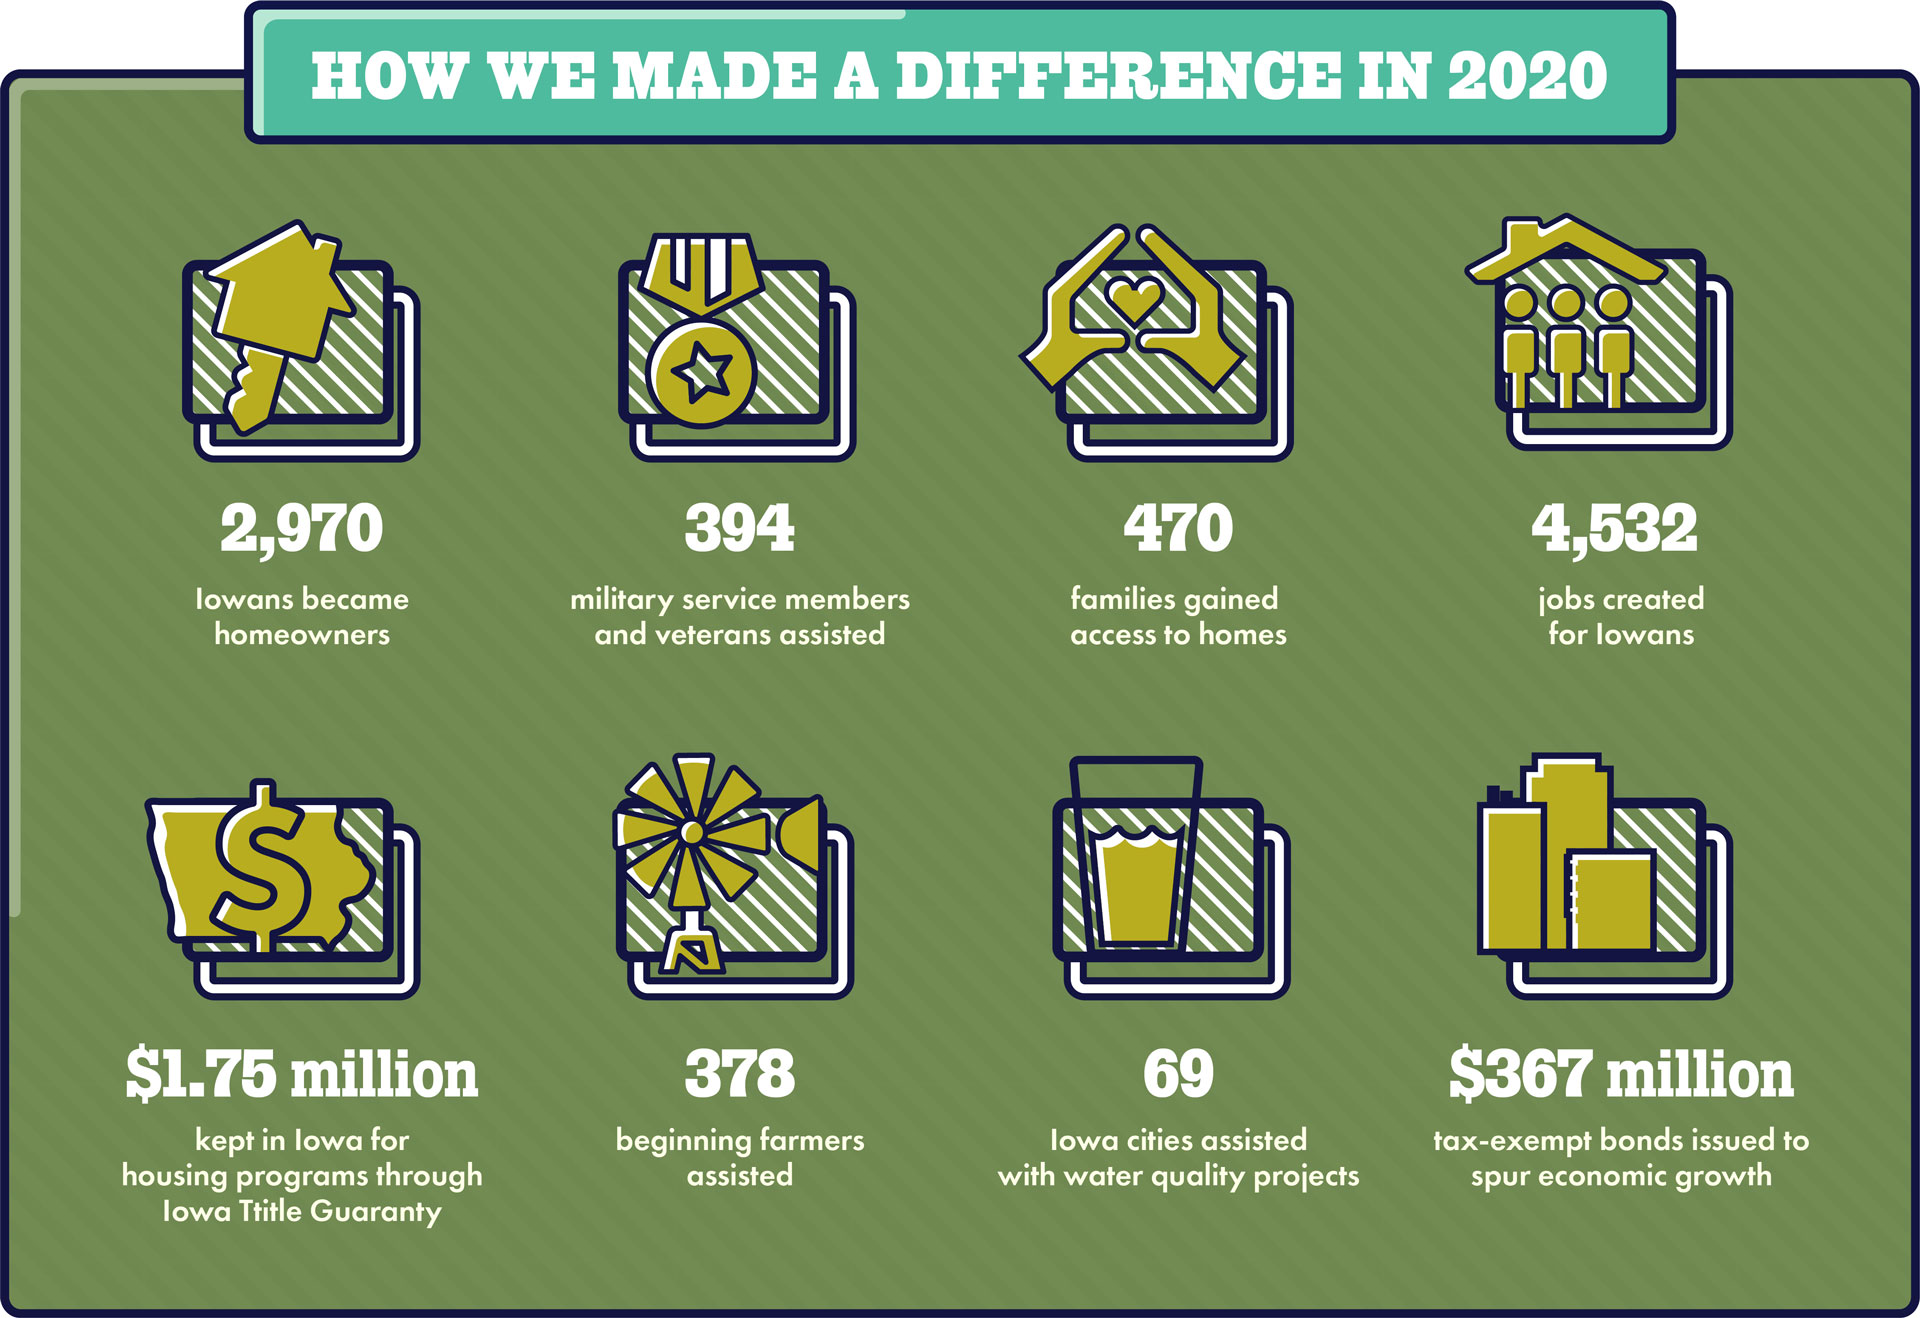 An illustration showing how IFA made a difference in 2020